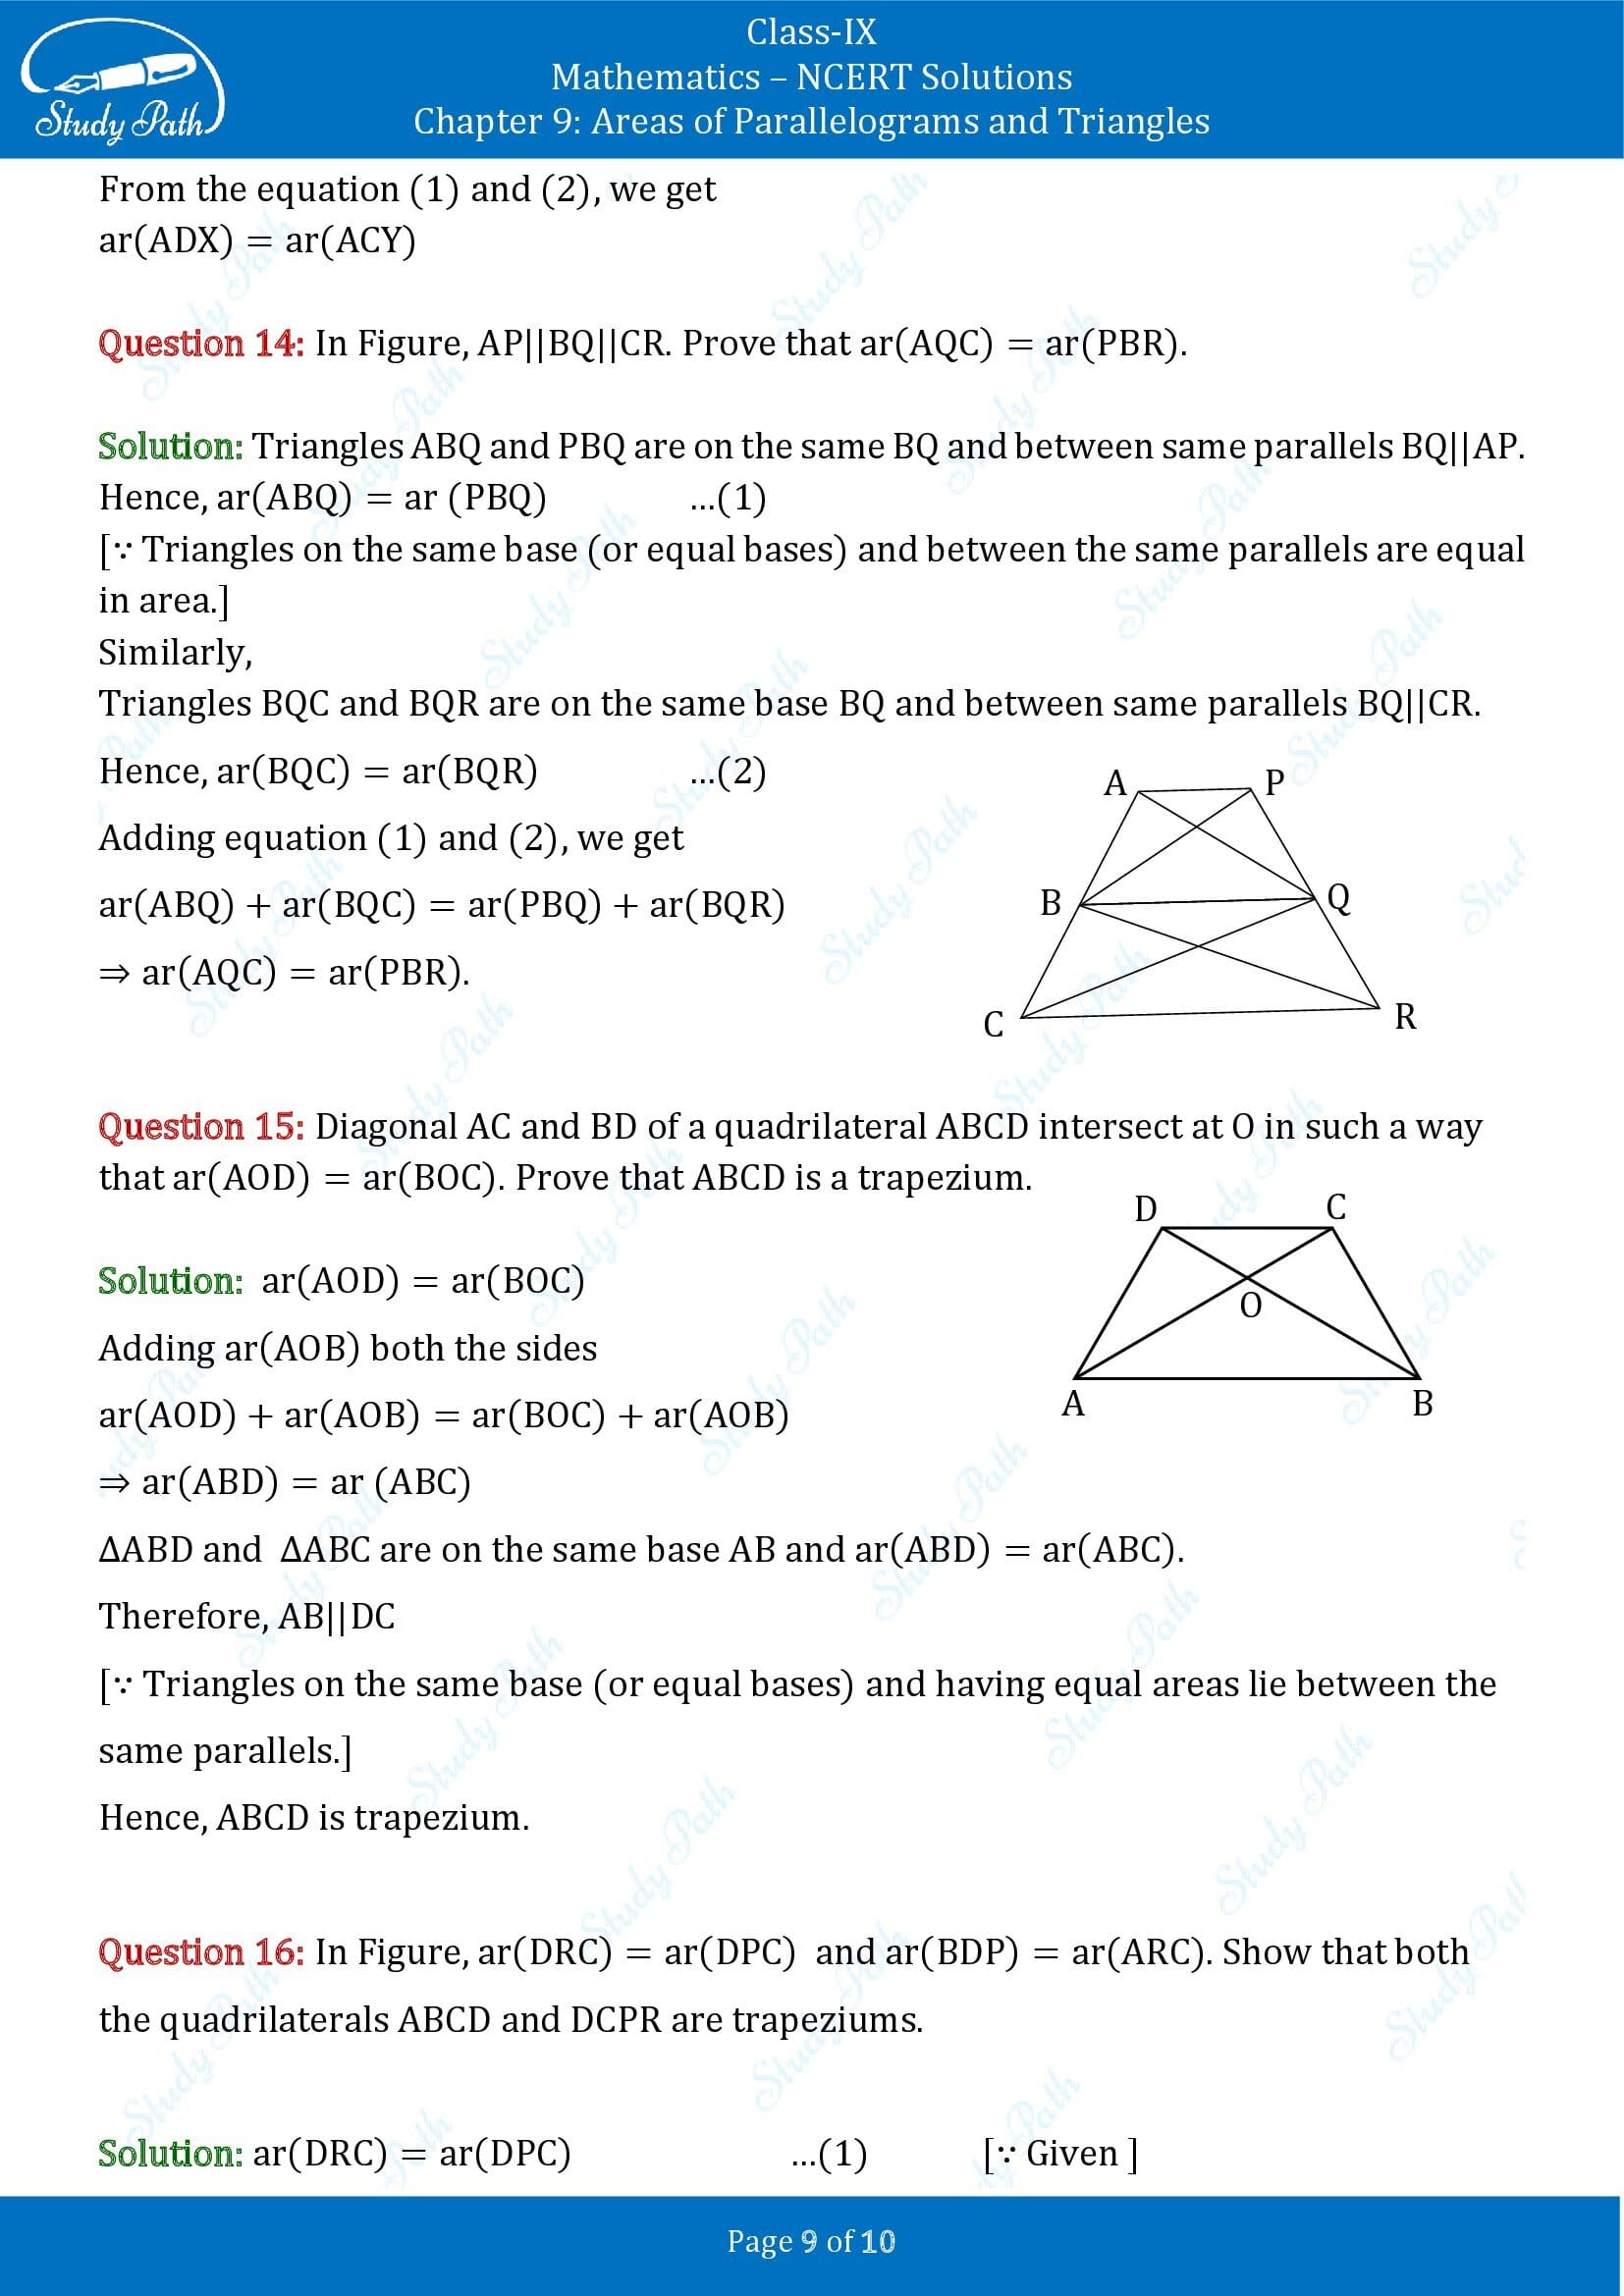 NCERT Solutions for Class 9 Maths Chapter 9 Areas of Parallelograms and Triangles Exercise 9.3 00009